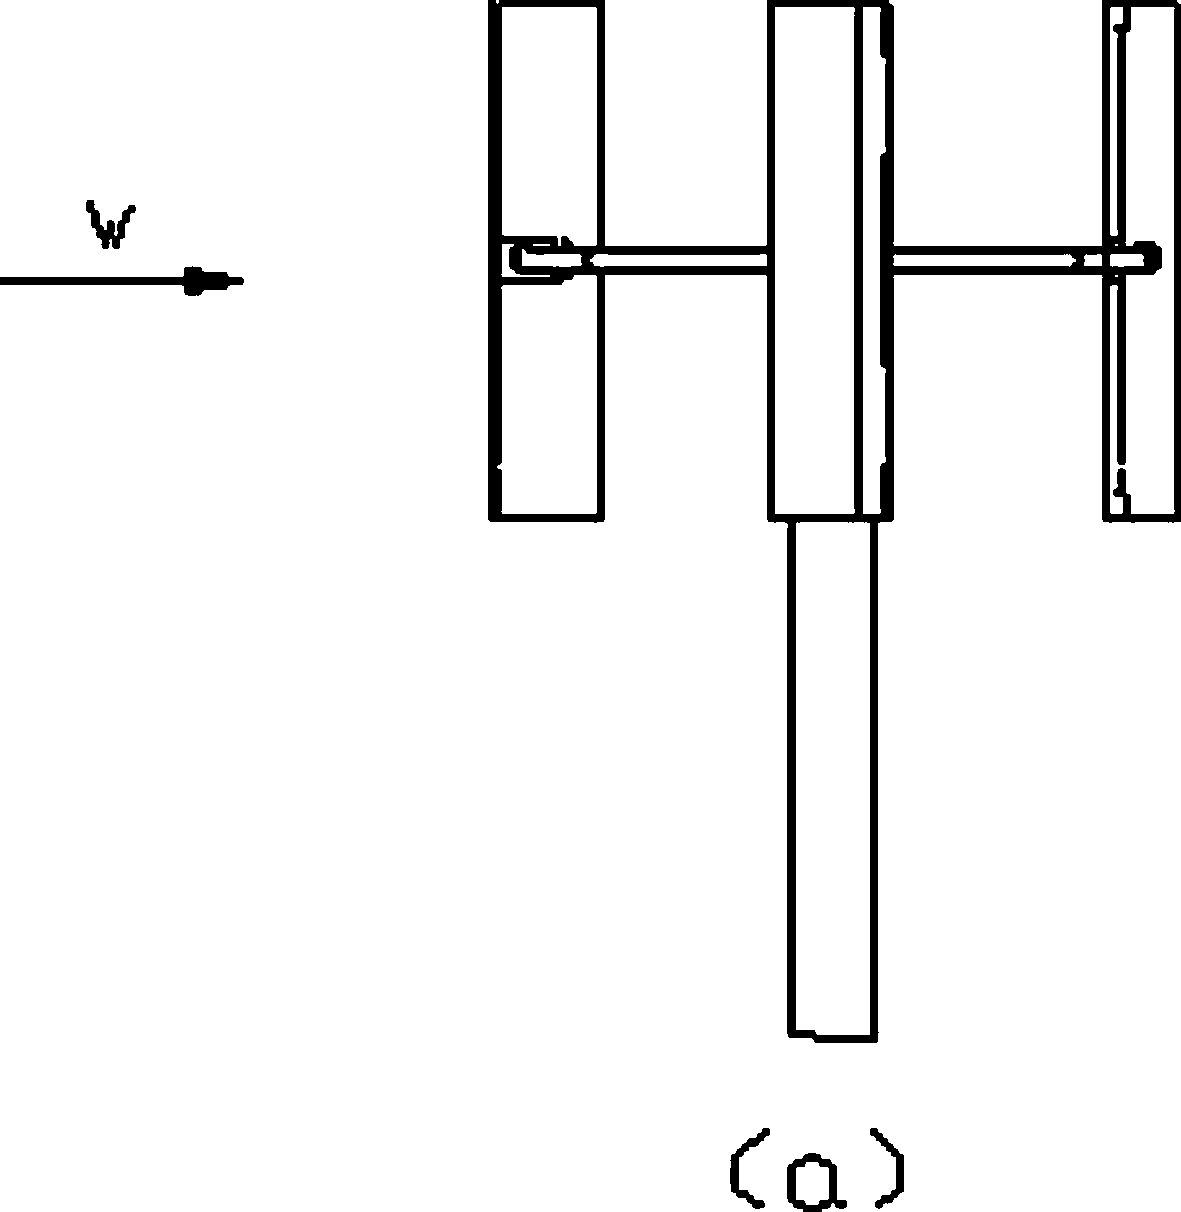 Vertical-axis wind generator with starting auxiliary wings